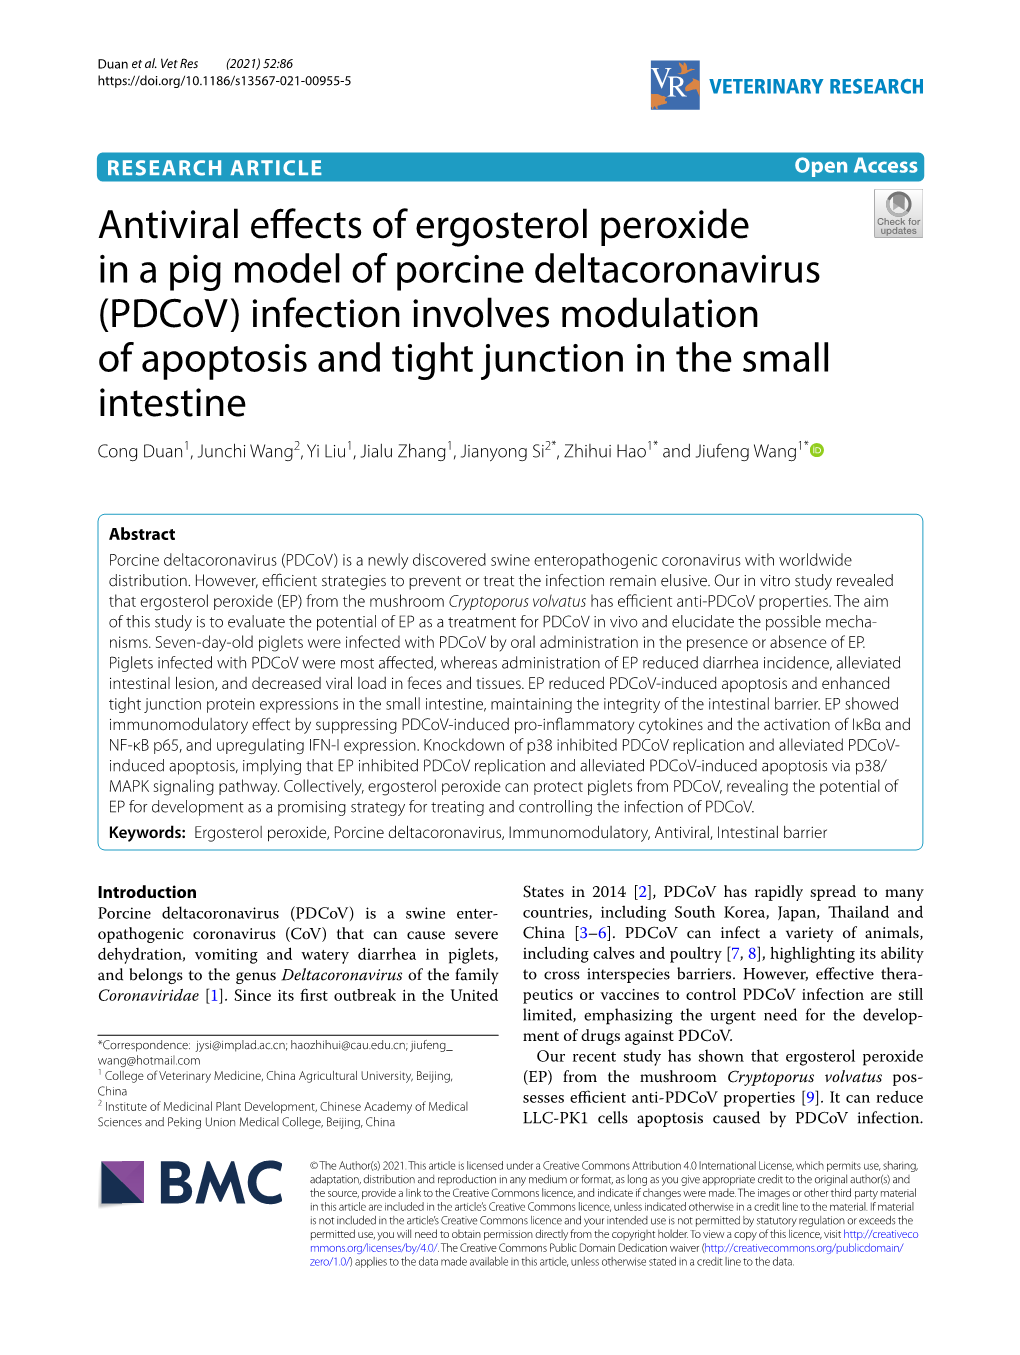 Antiviral Effects of Ergosterol Peroxide in a Pig